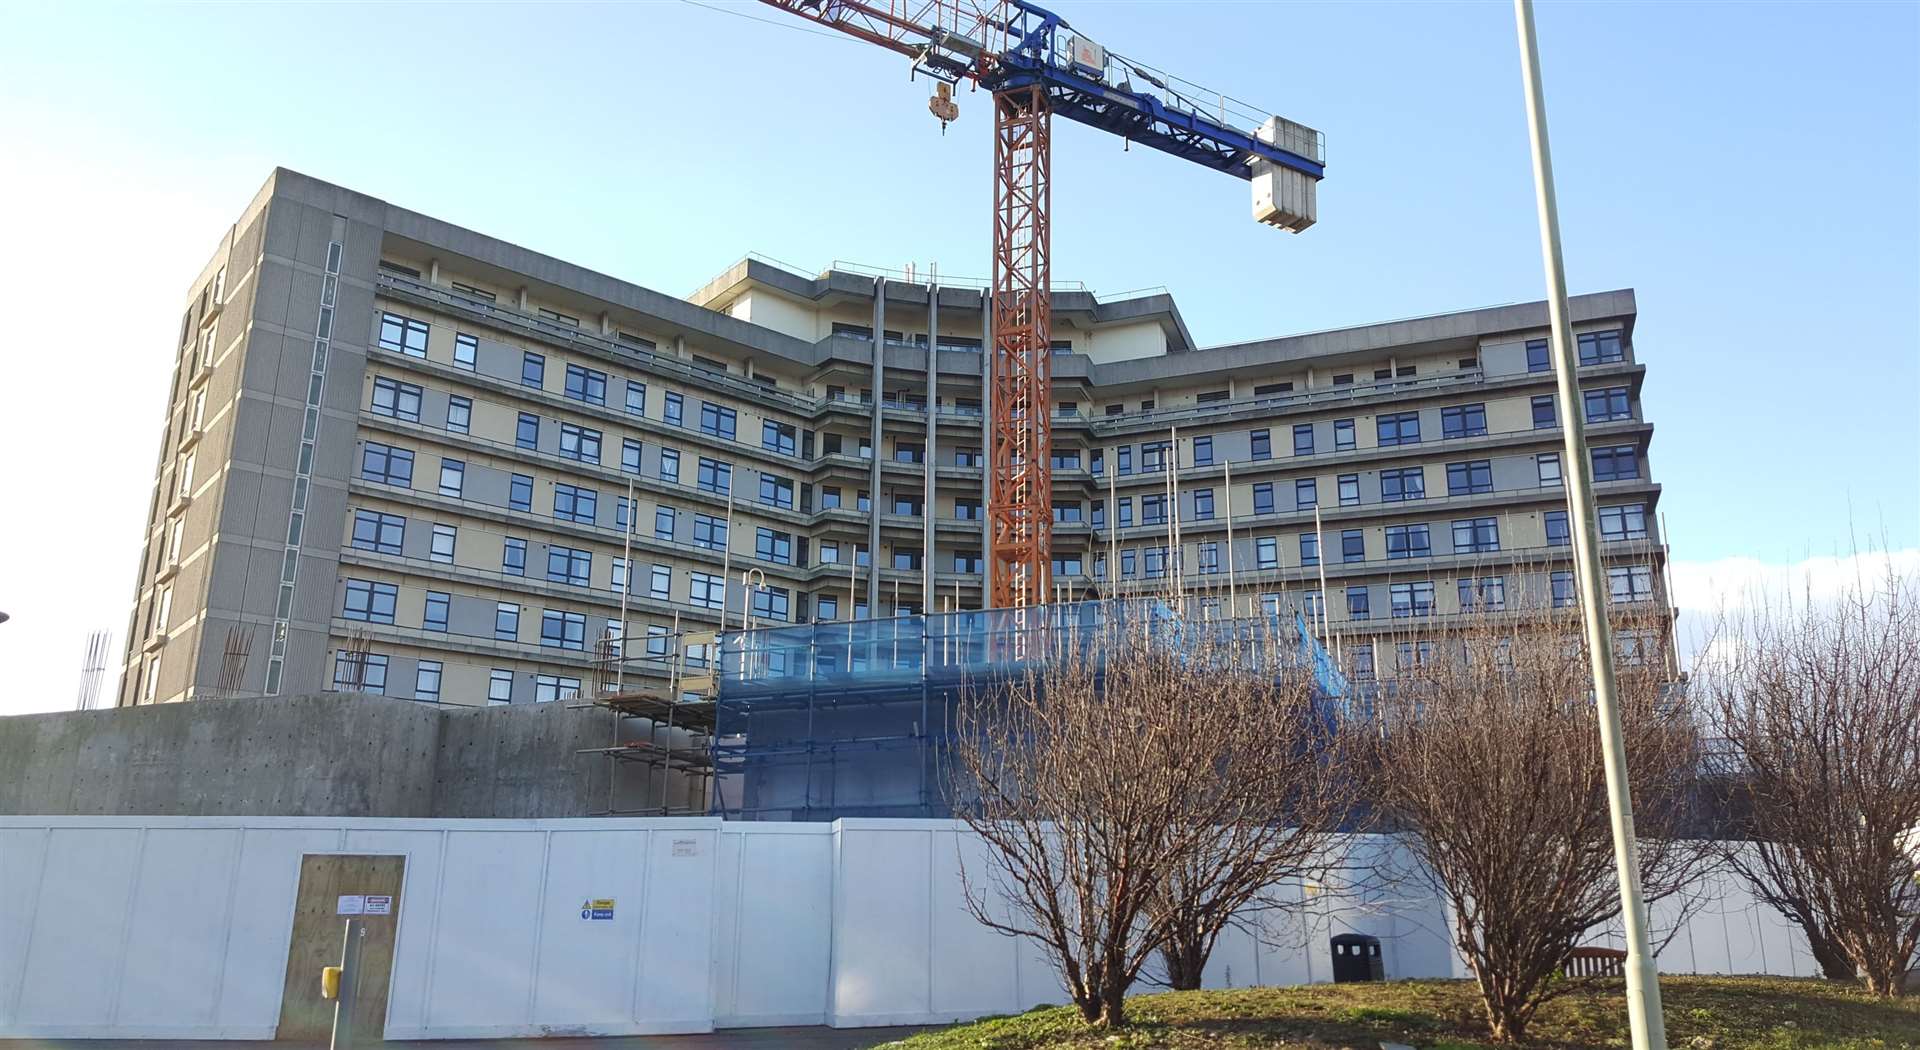 The construction site in January 2019